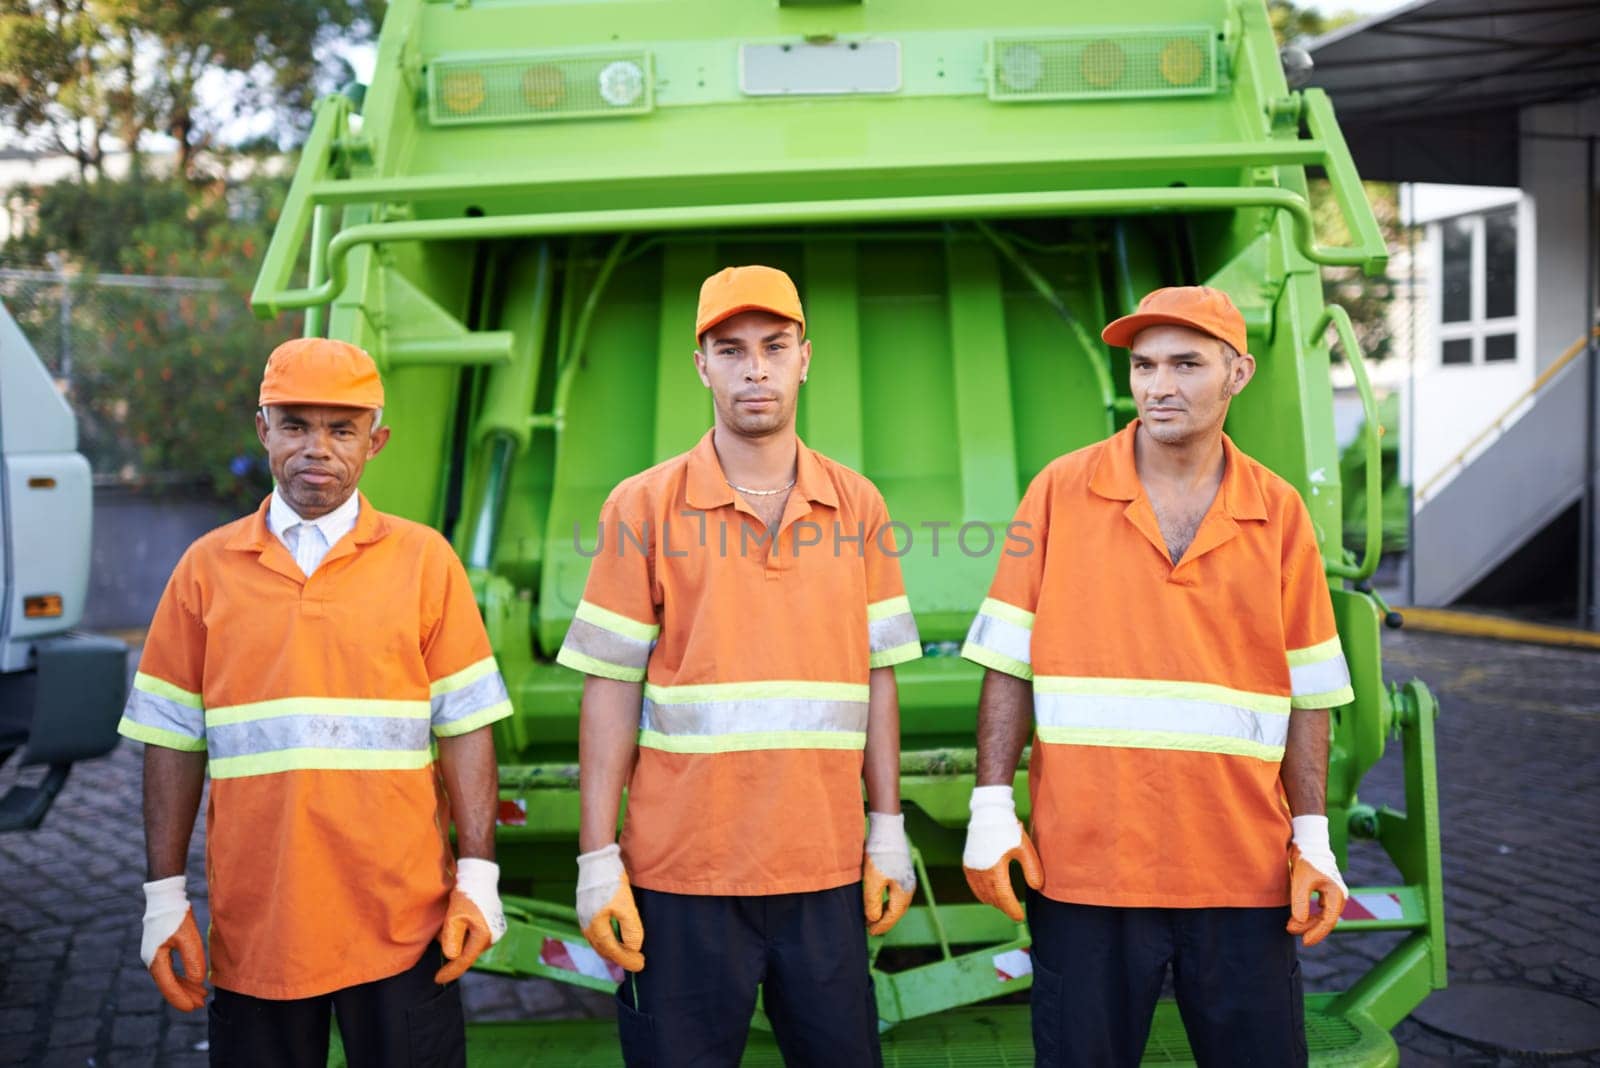 Men, garbage truck and portrait or collection service in city or waste management or pollution, plastic or environment. Teamwork, face and dirt transportation in New York or sanitation, junk or trash.